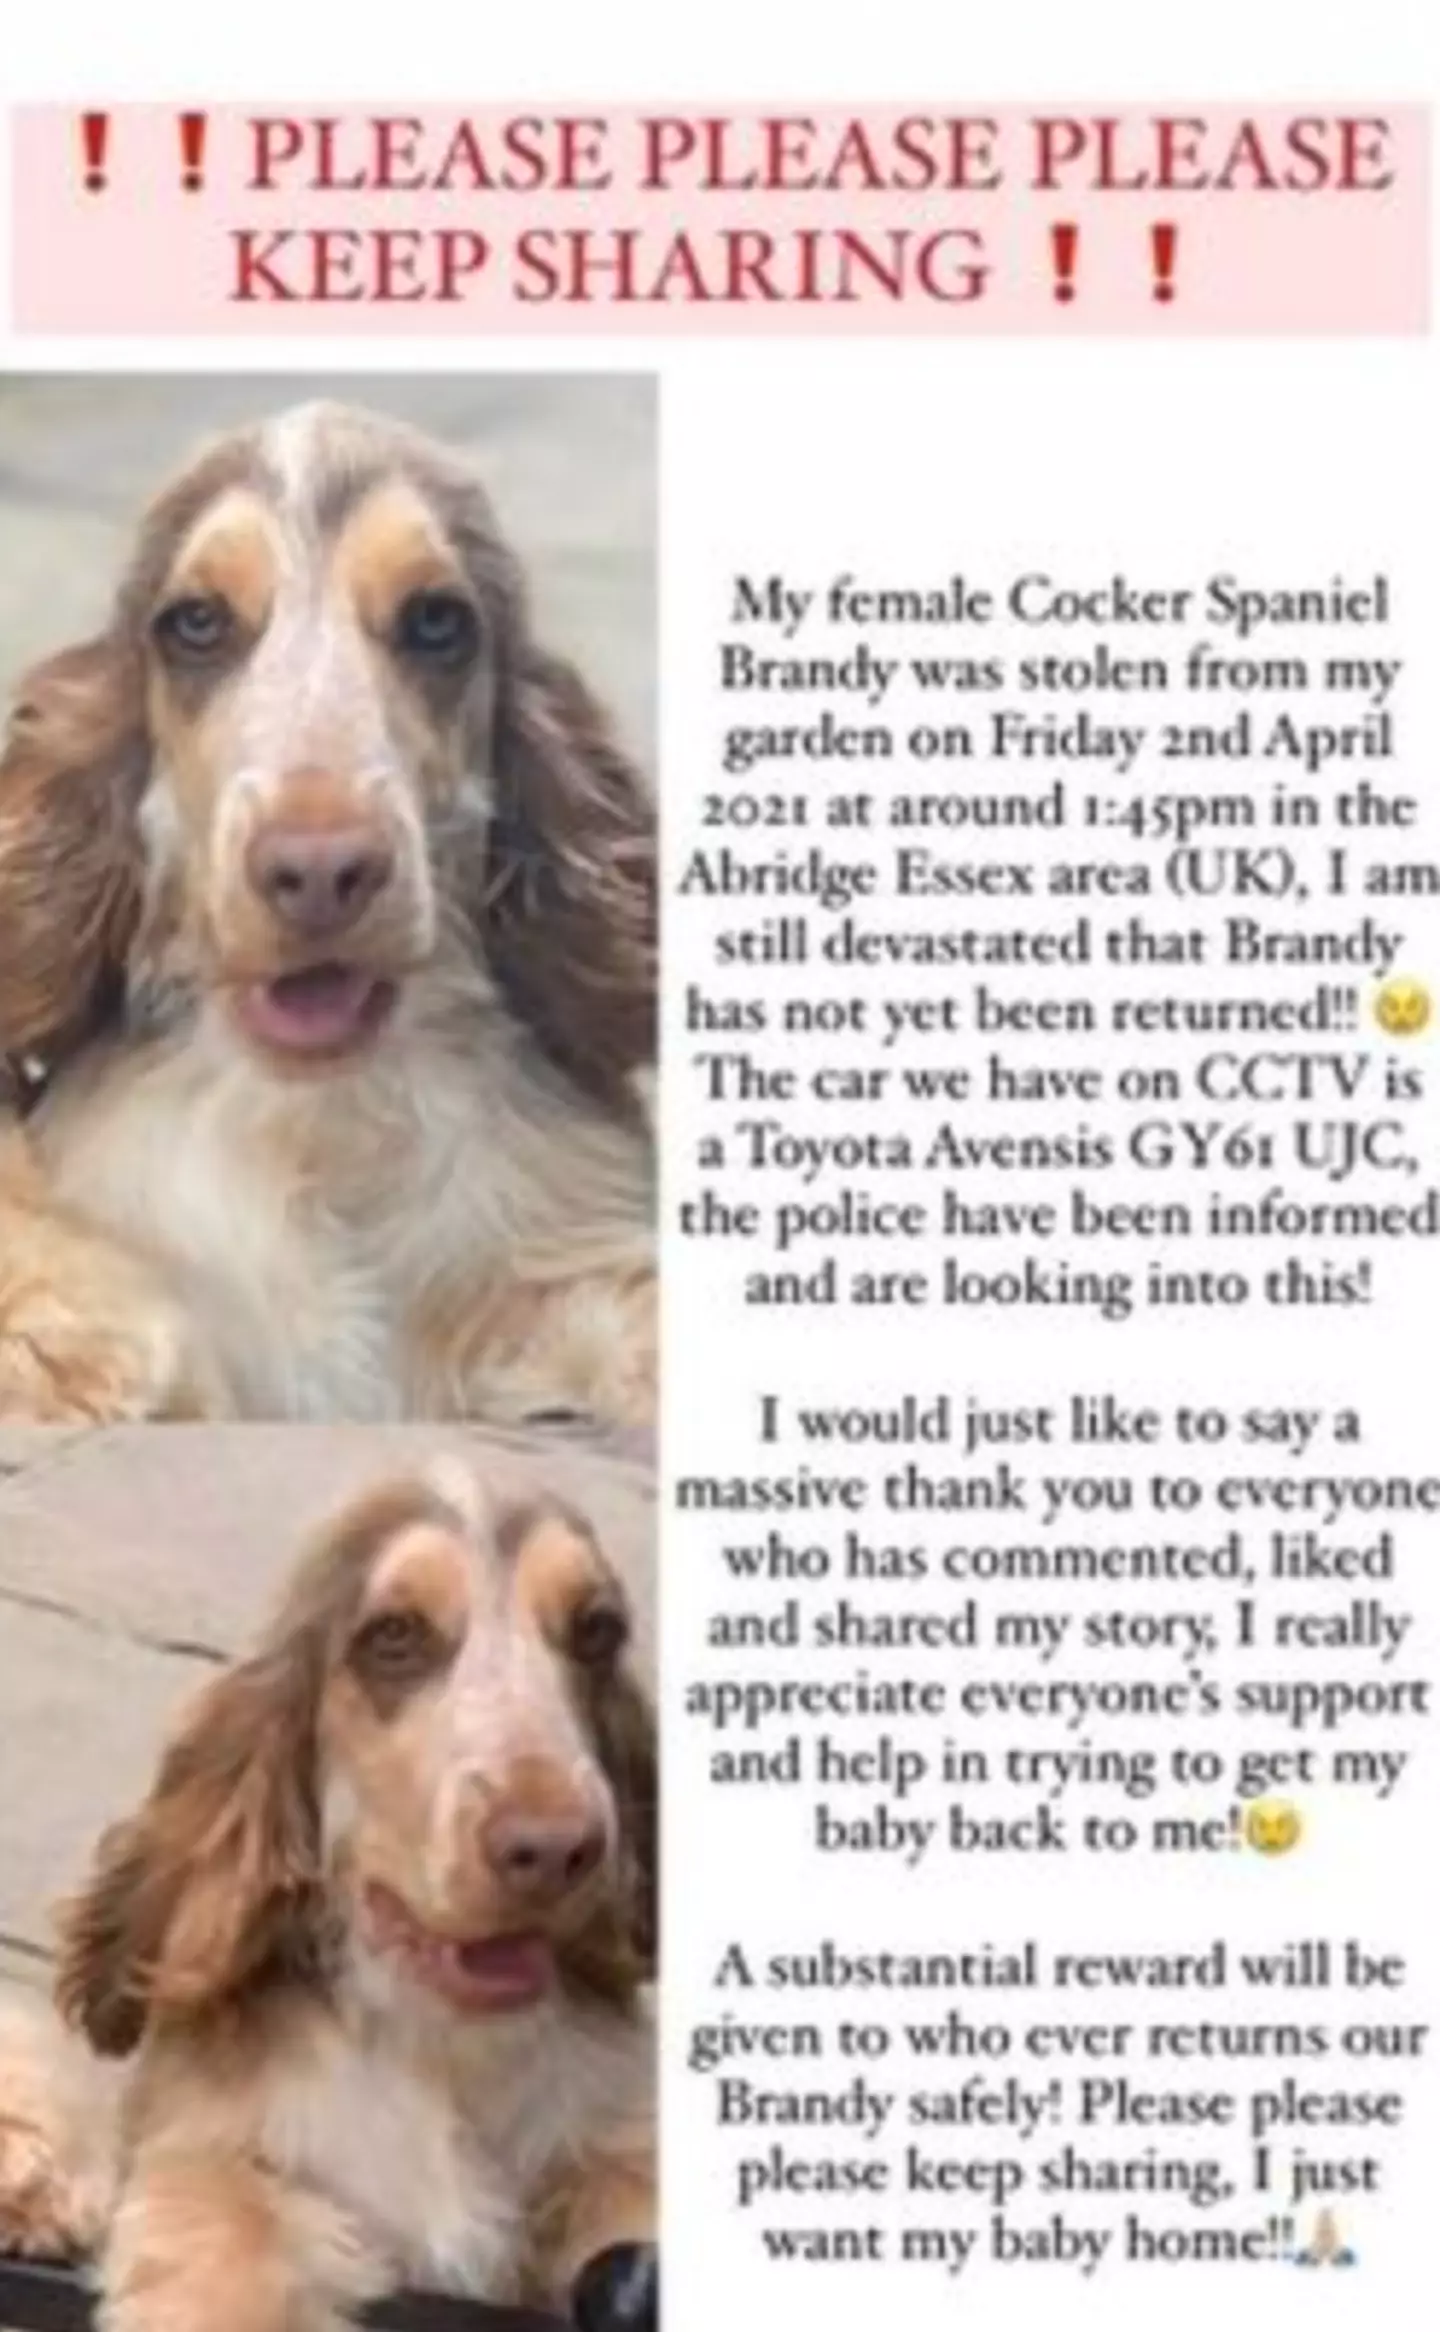 At the time, Brandy's owners shared a post explaining that their beloved pup had been stolen from their back garden.